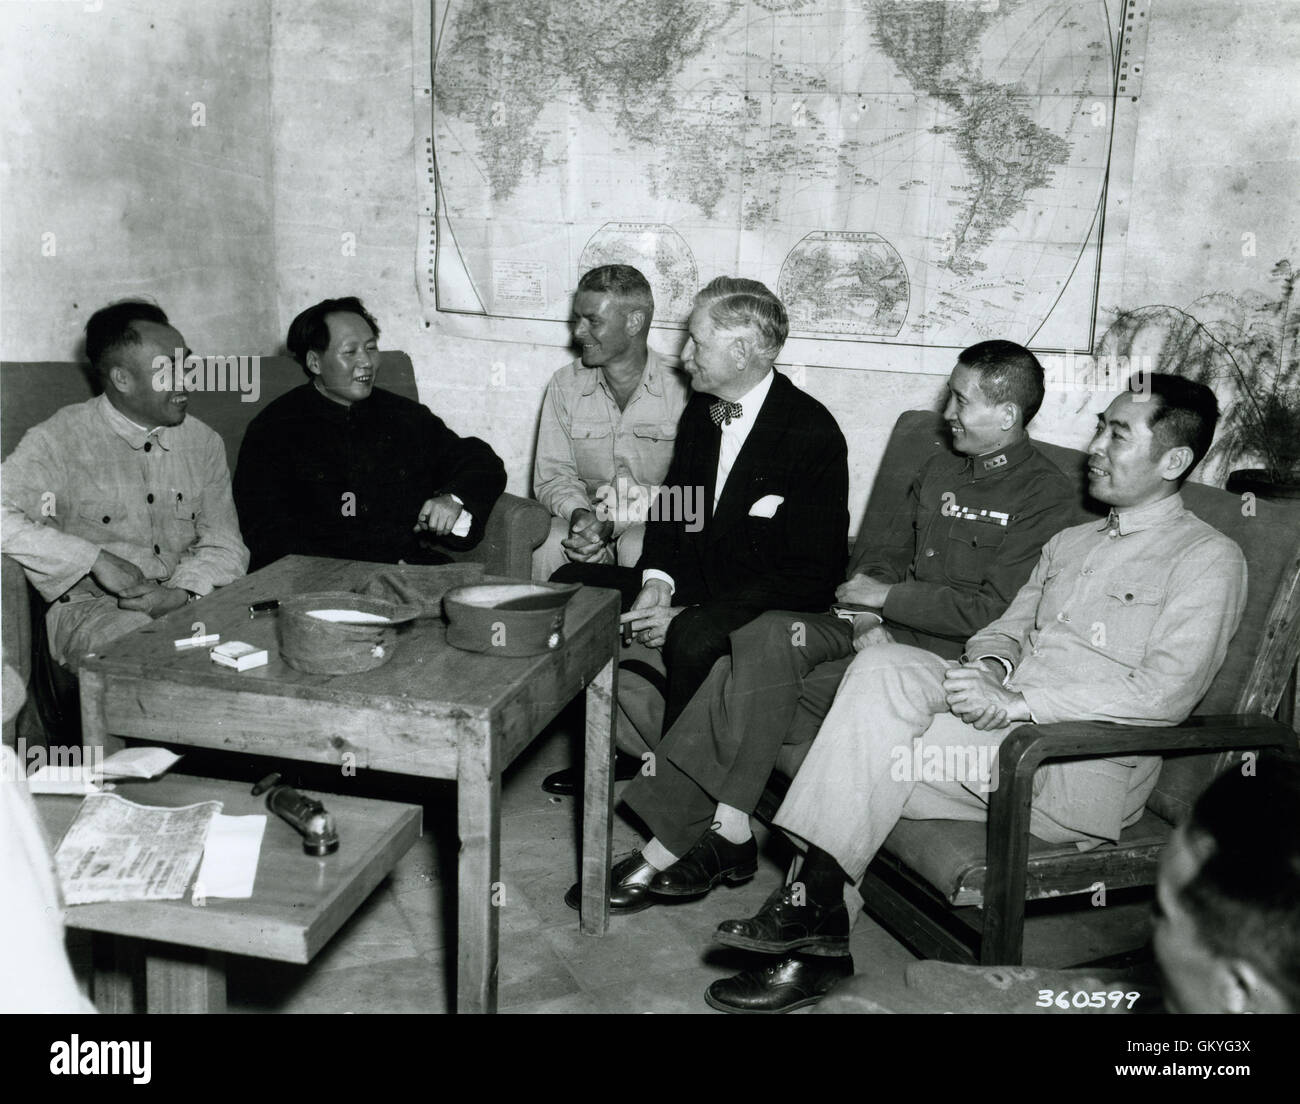 Conference at Yenan Communist Headquarters before Mao Tze Tung, chairman, left for Chungking meeting. Central figures are U.S. Ambassador Patrick J. Hurley, Col. I.V. Yeaton, U.S. Army observer, and Mao Tze Tung. Stock Photo